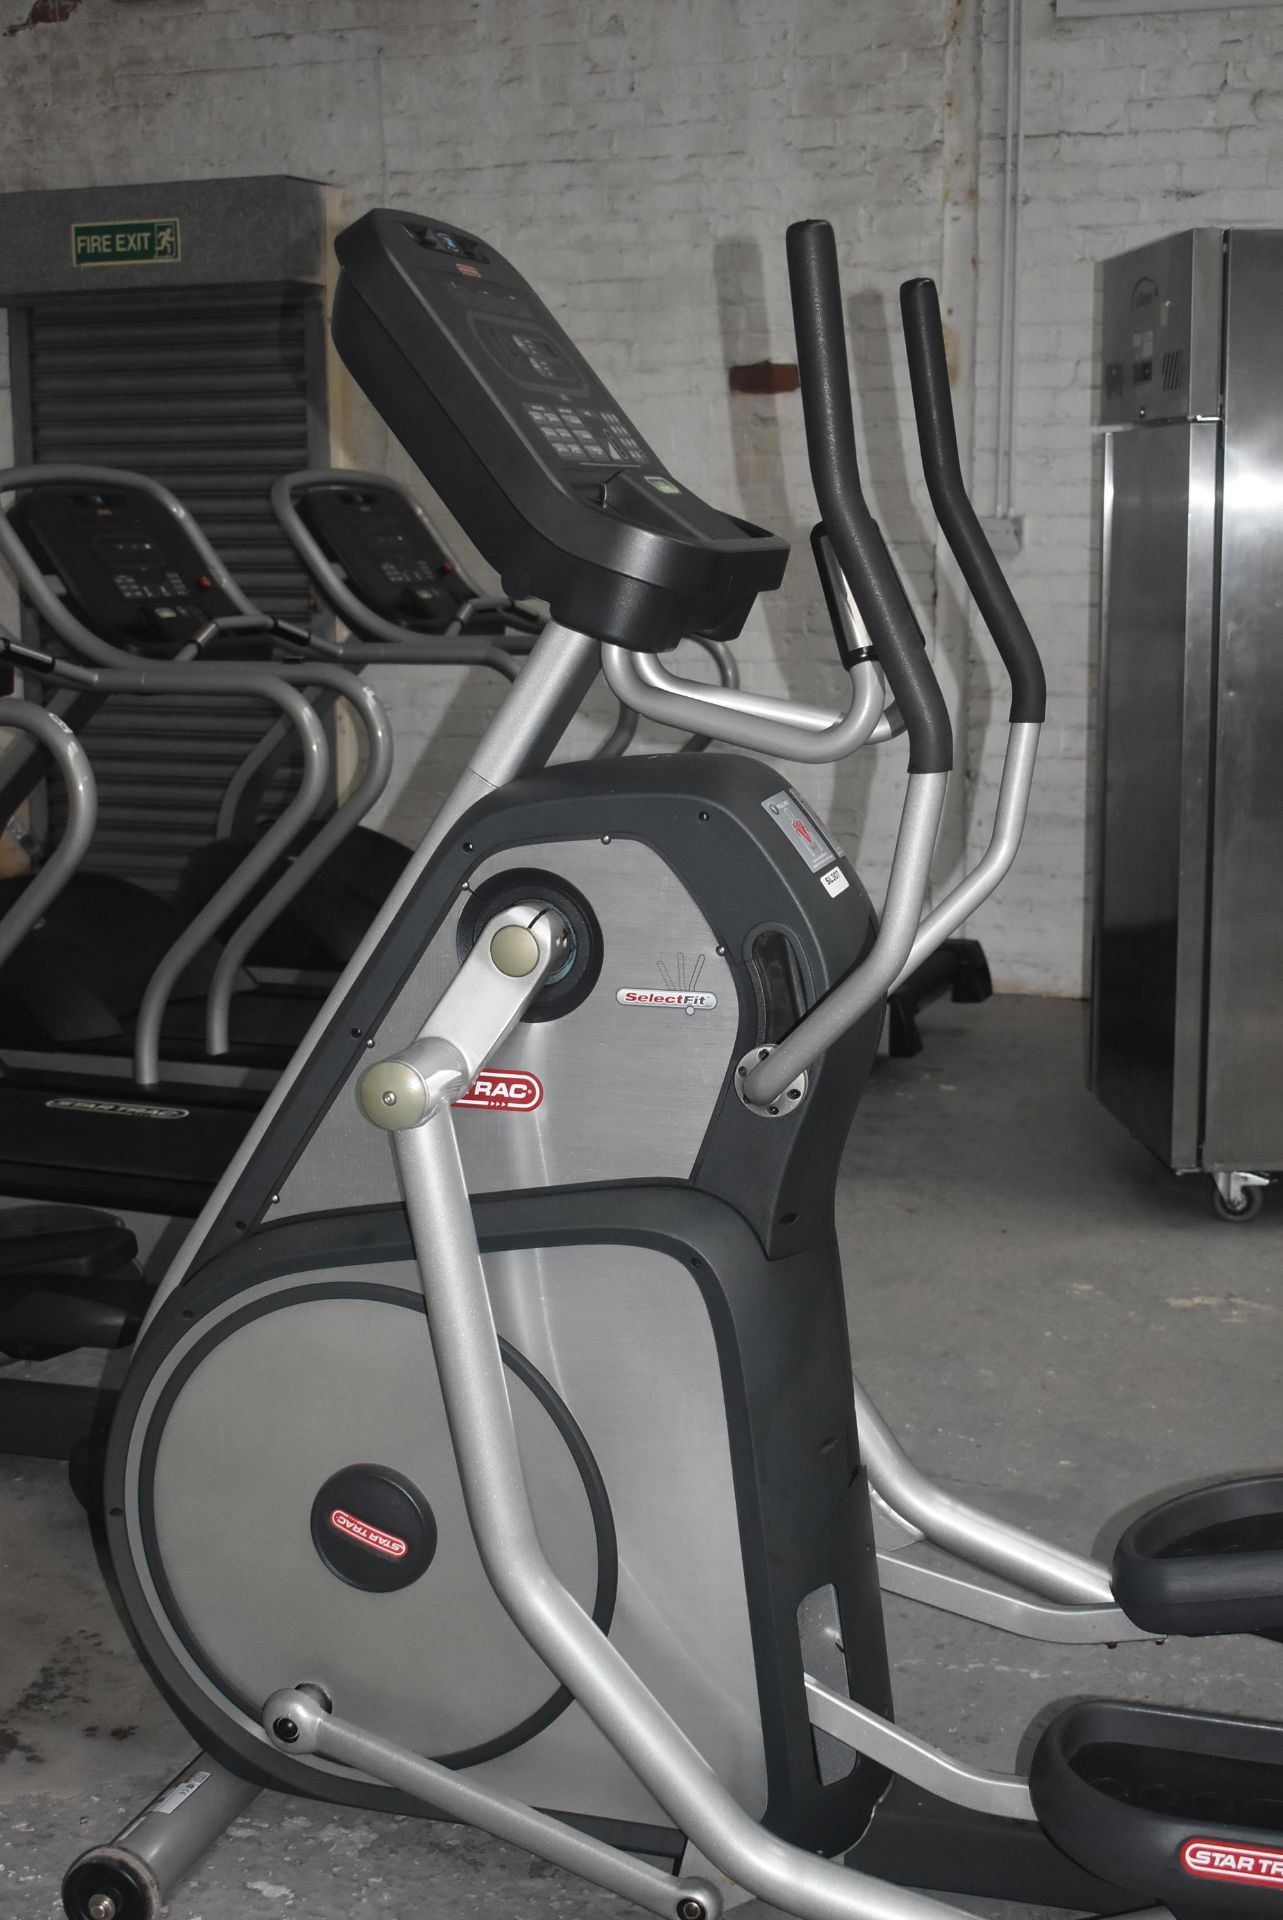 1 x Star Trac Commercial Excercise Elliptical Cross Trainer - CL011 - Ref SL307 GIT -  Location: - Image 3 of 9